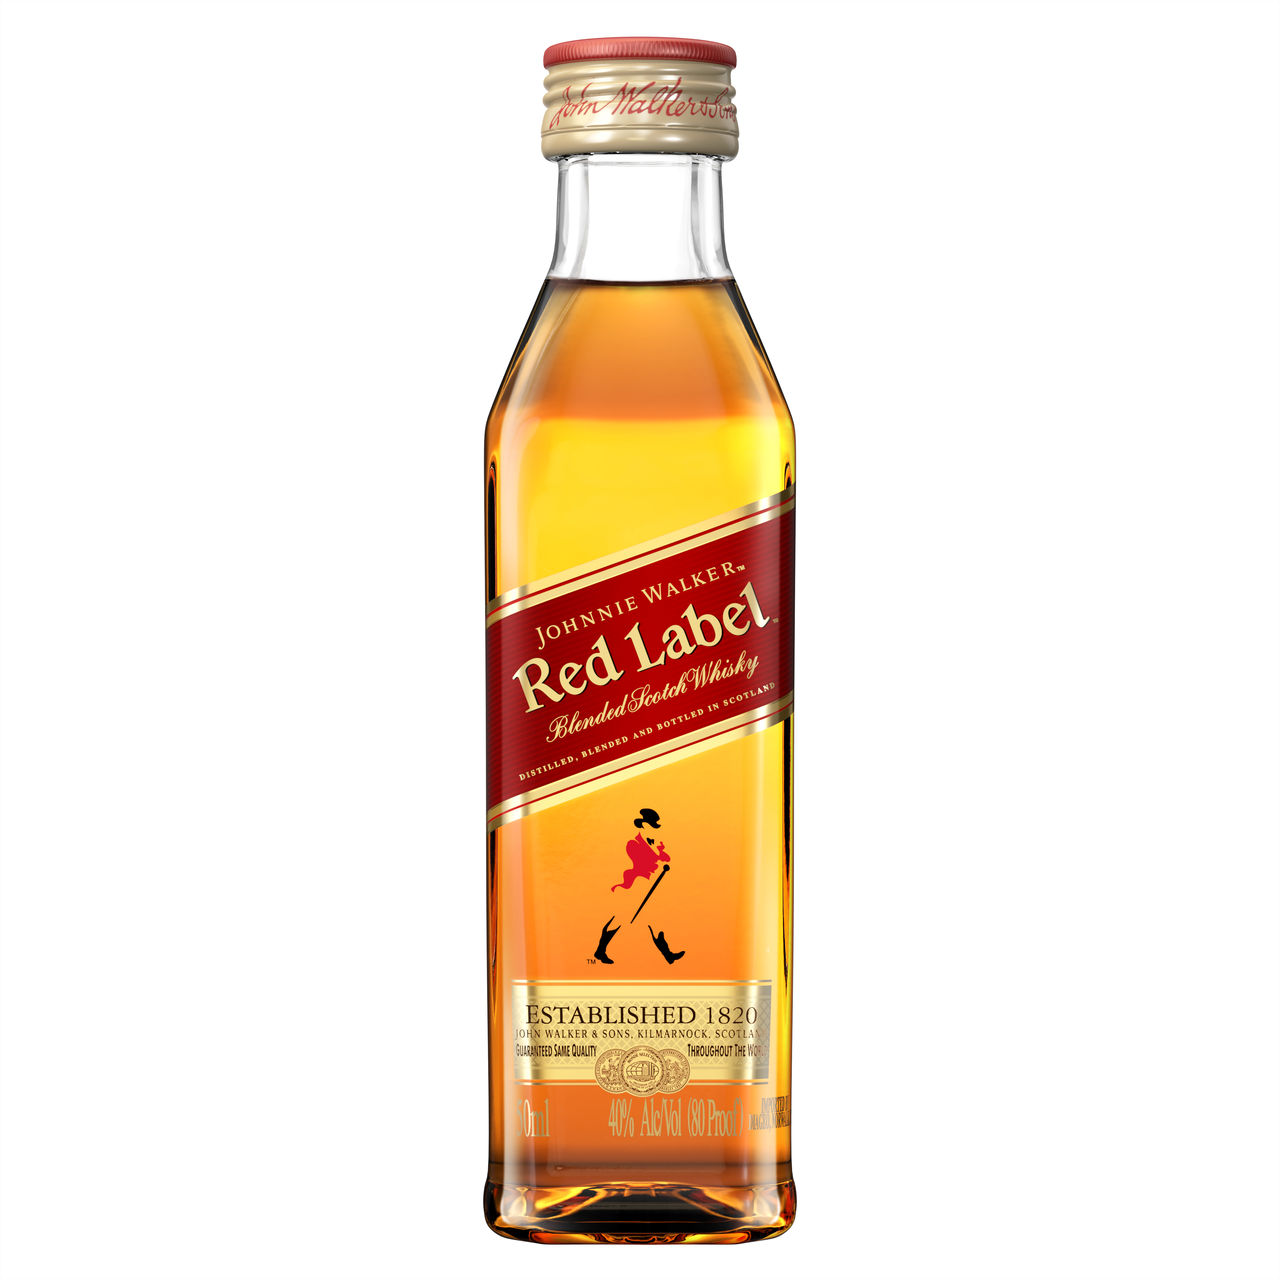 Johnnie Walker Red Label 0.05 л. Виски Джонни Уокер ред лейбл 0.5. Johnnie Walker Red Label Blended Scotch Whisky. Johnny Walker Red Label 0.5. Сколько стоит лейбл